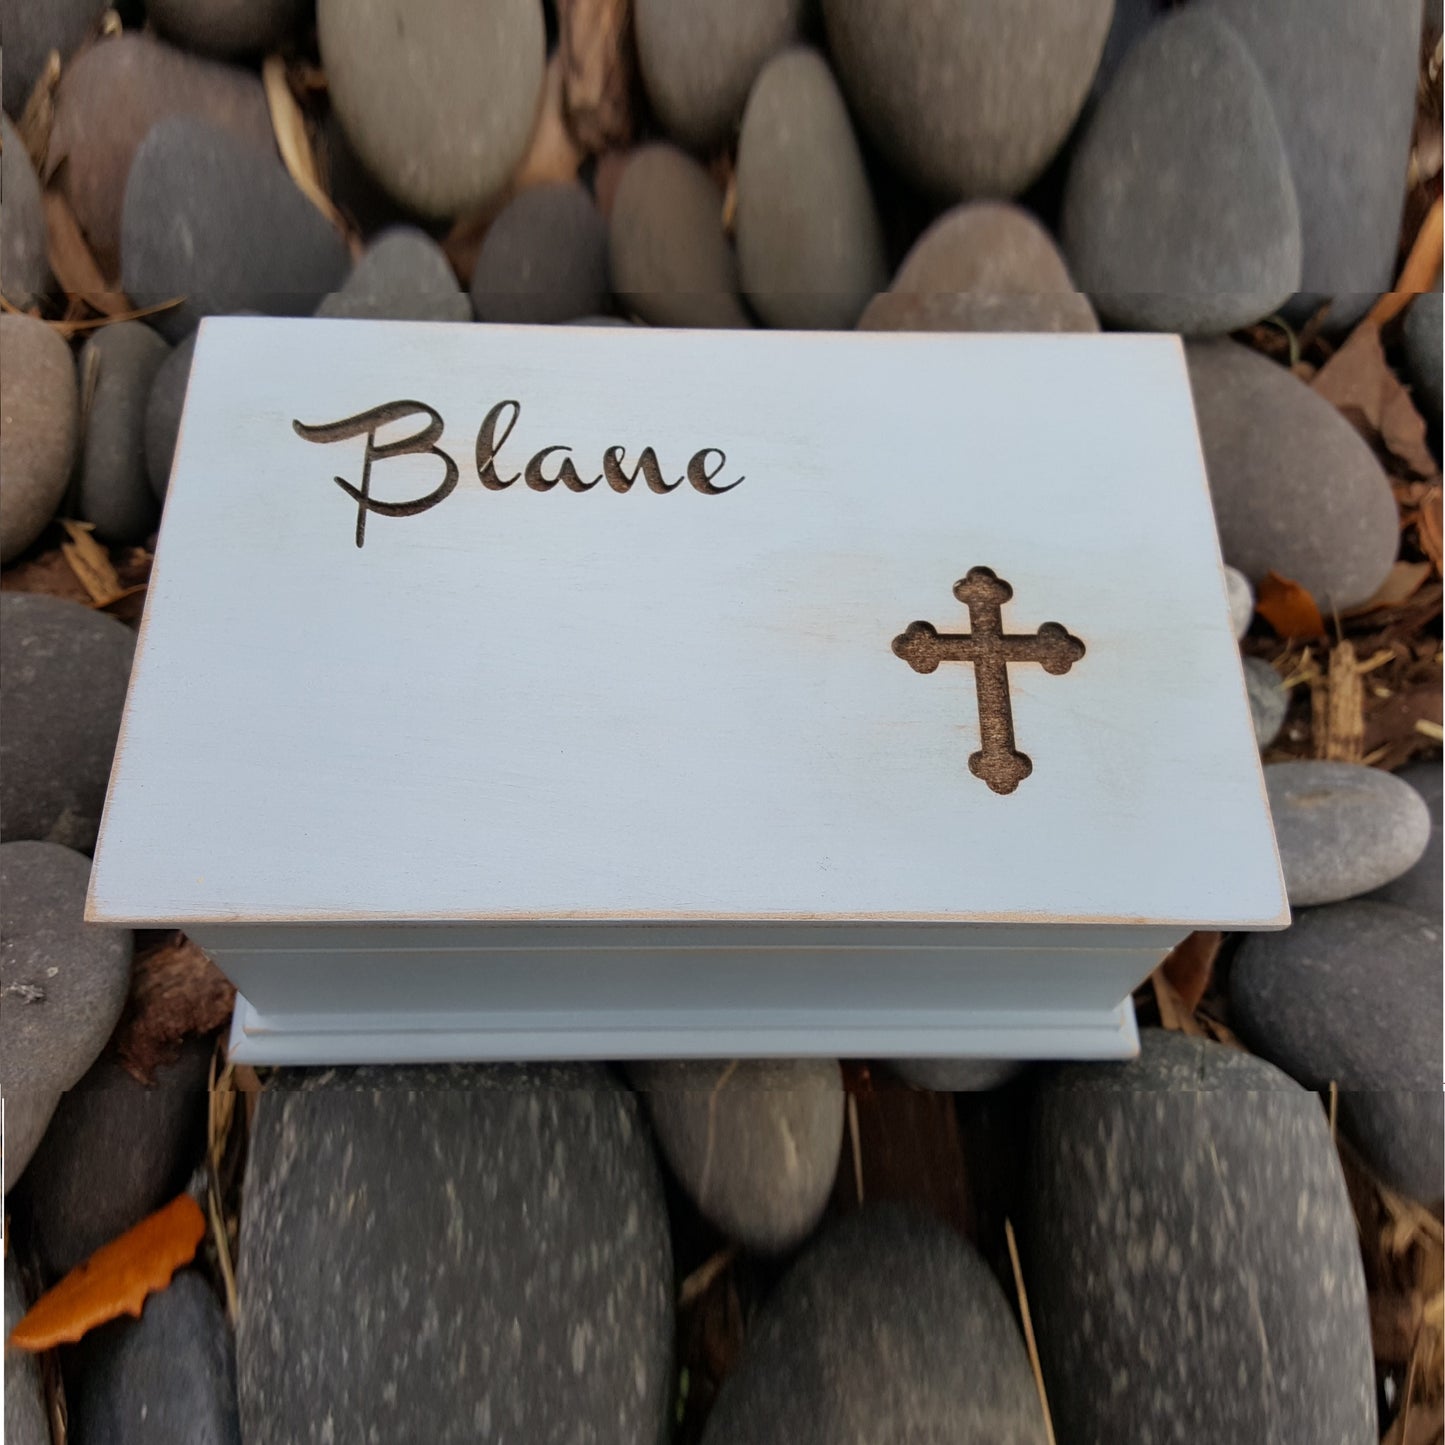 Christening music jewelry box with cross and name engraved on top